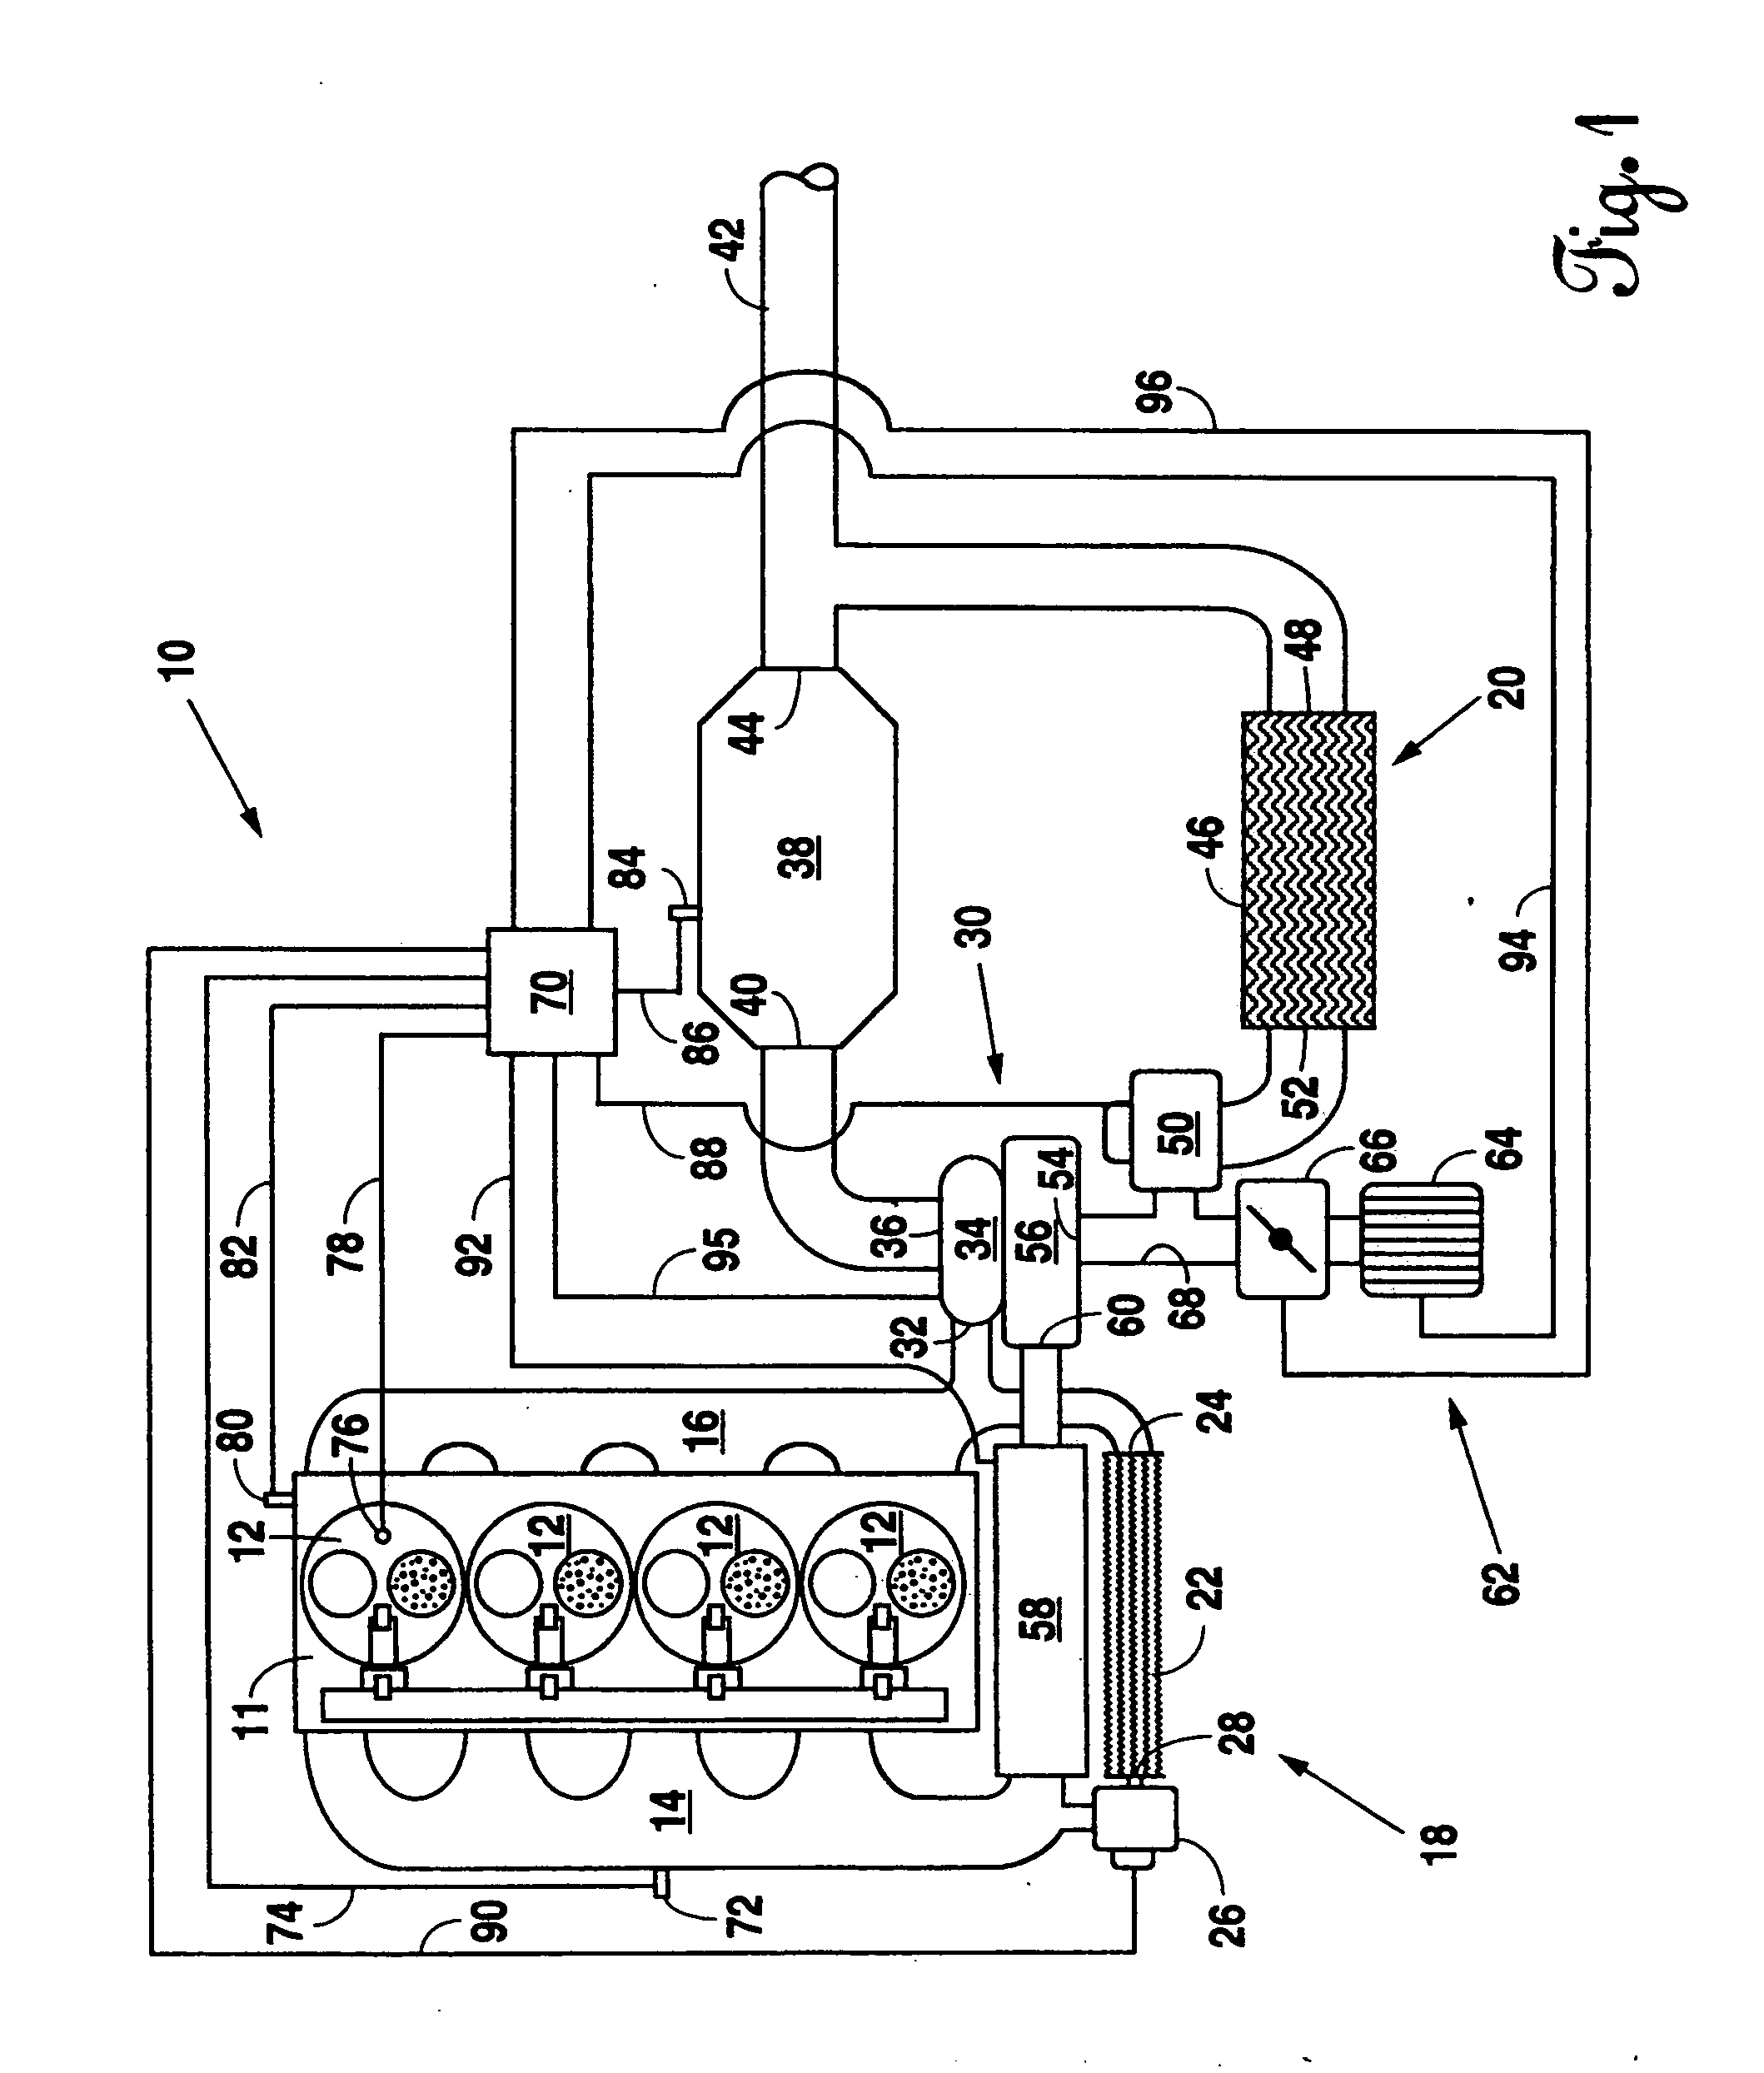 Dual loop exhaust gas recirculation system for diesel engines and method of operation